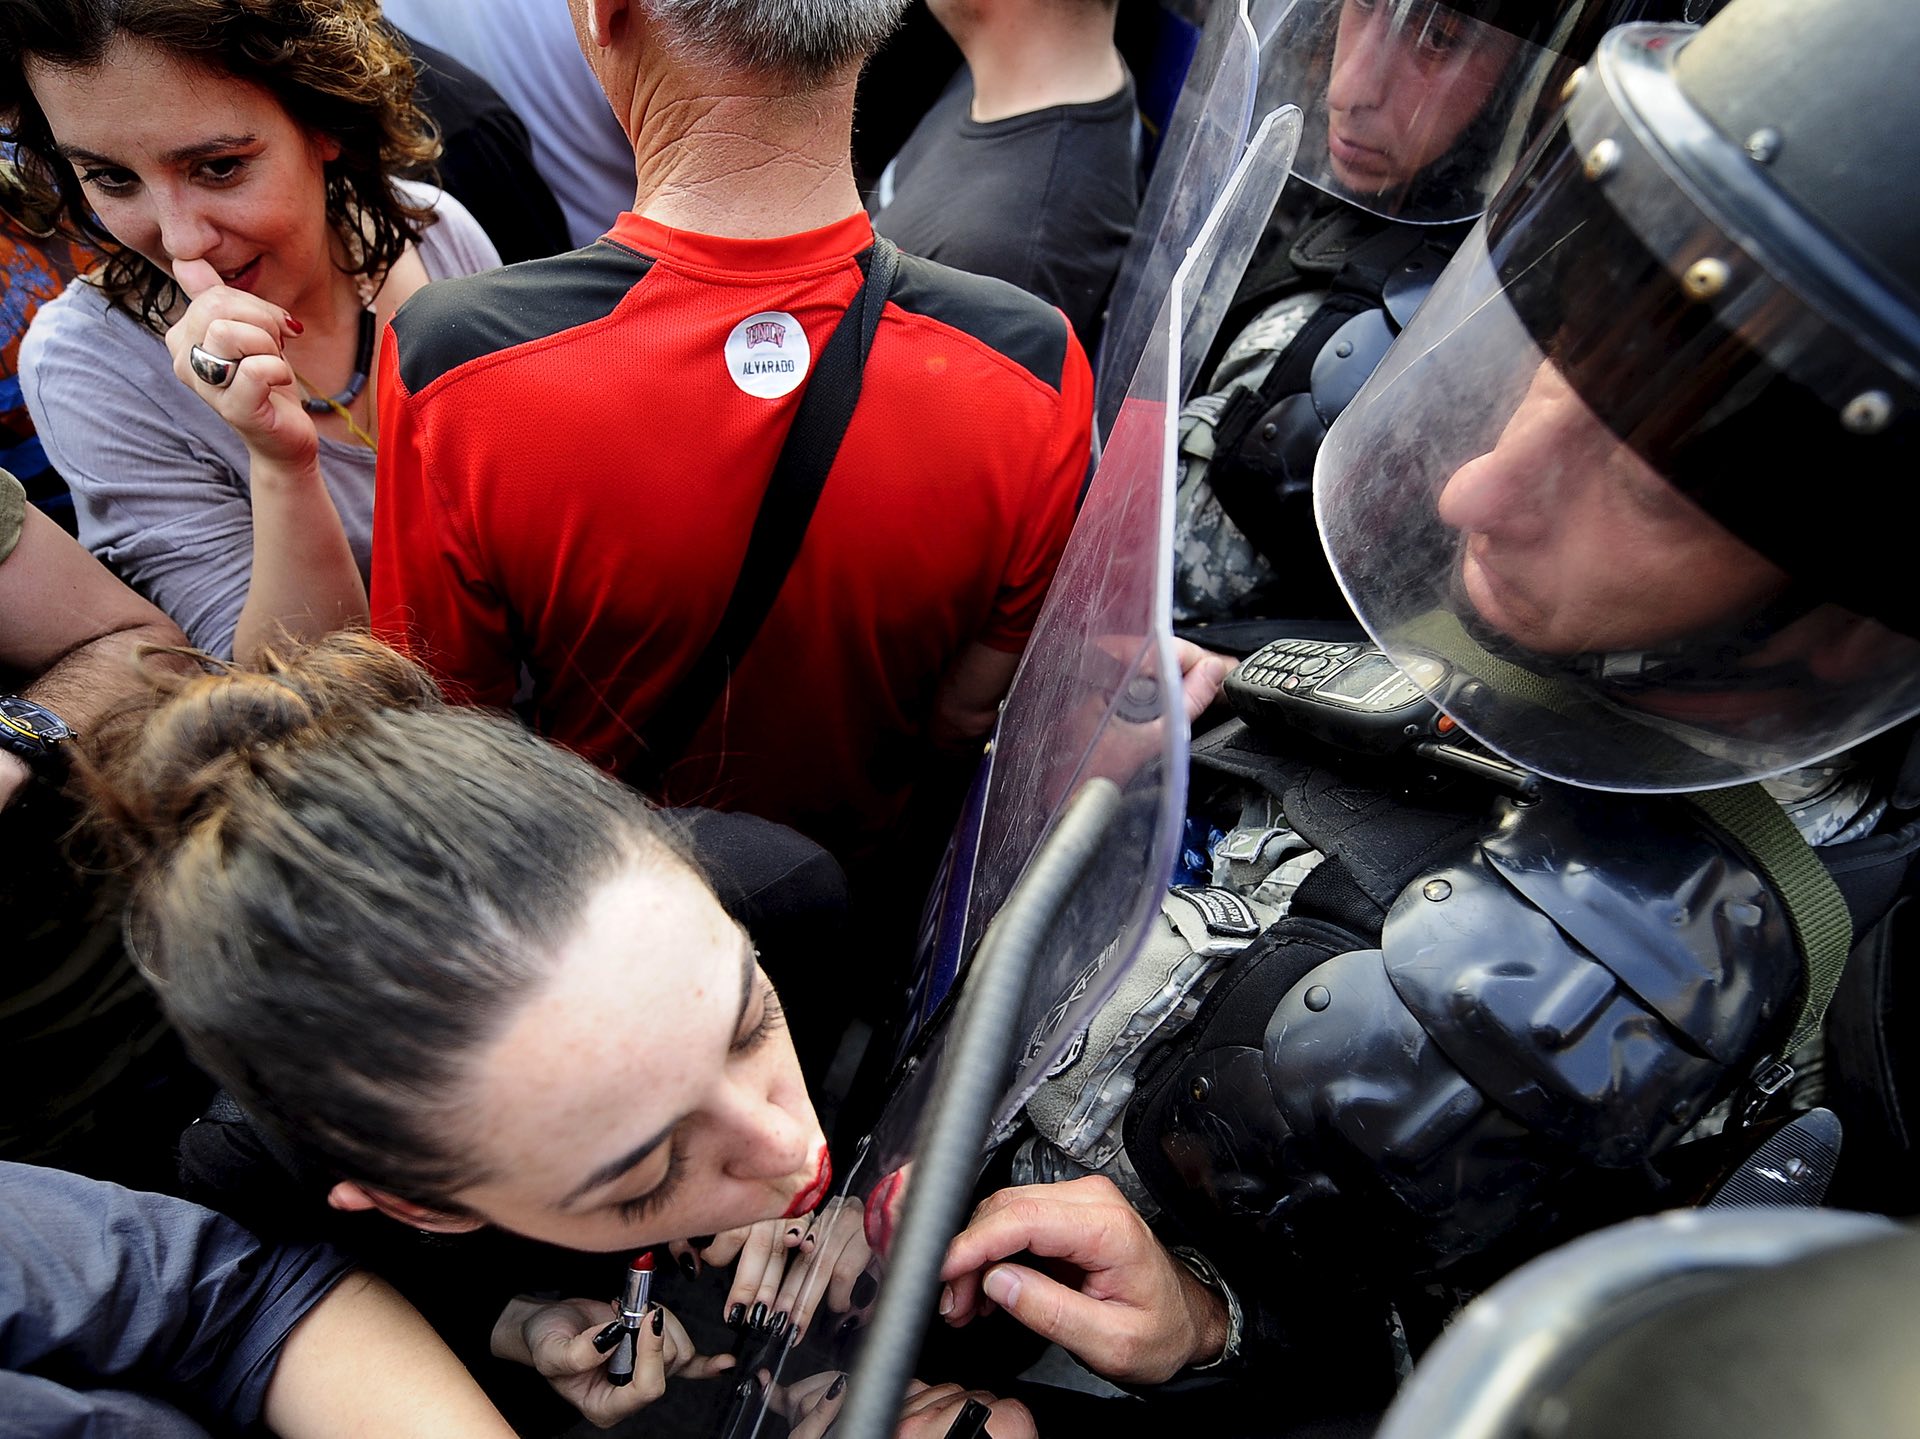 Jasmina Golubovska does her lipstick in the shield of a policeman in front of a government building in Skopje, Macedonia, on 5 May 2015. PHOTO: REUTERS